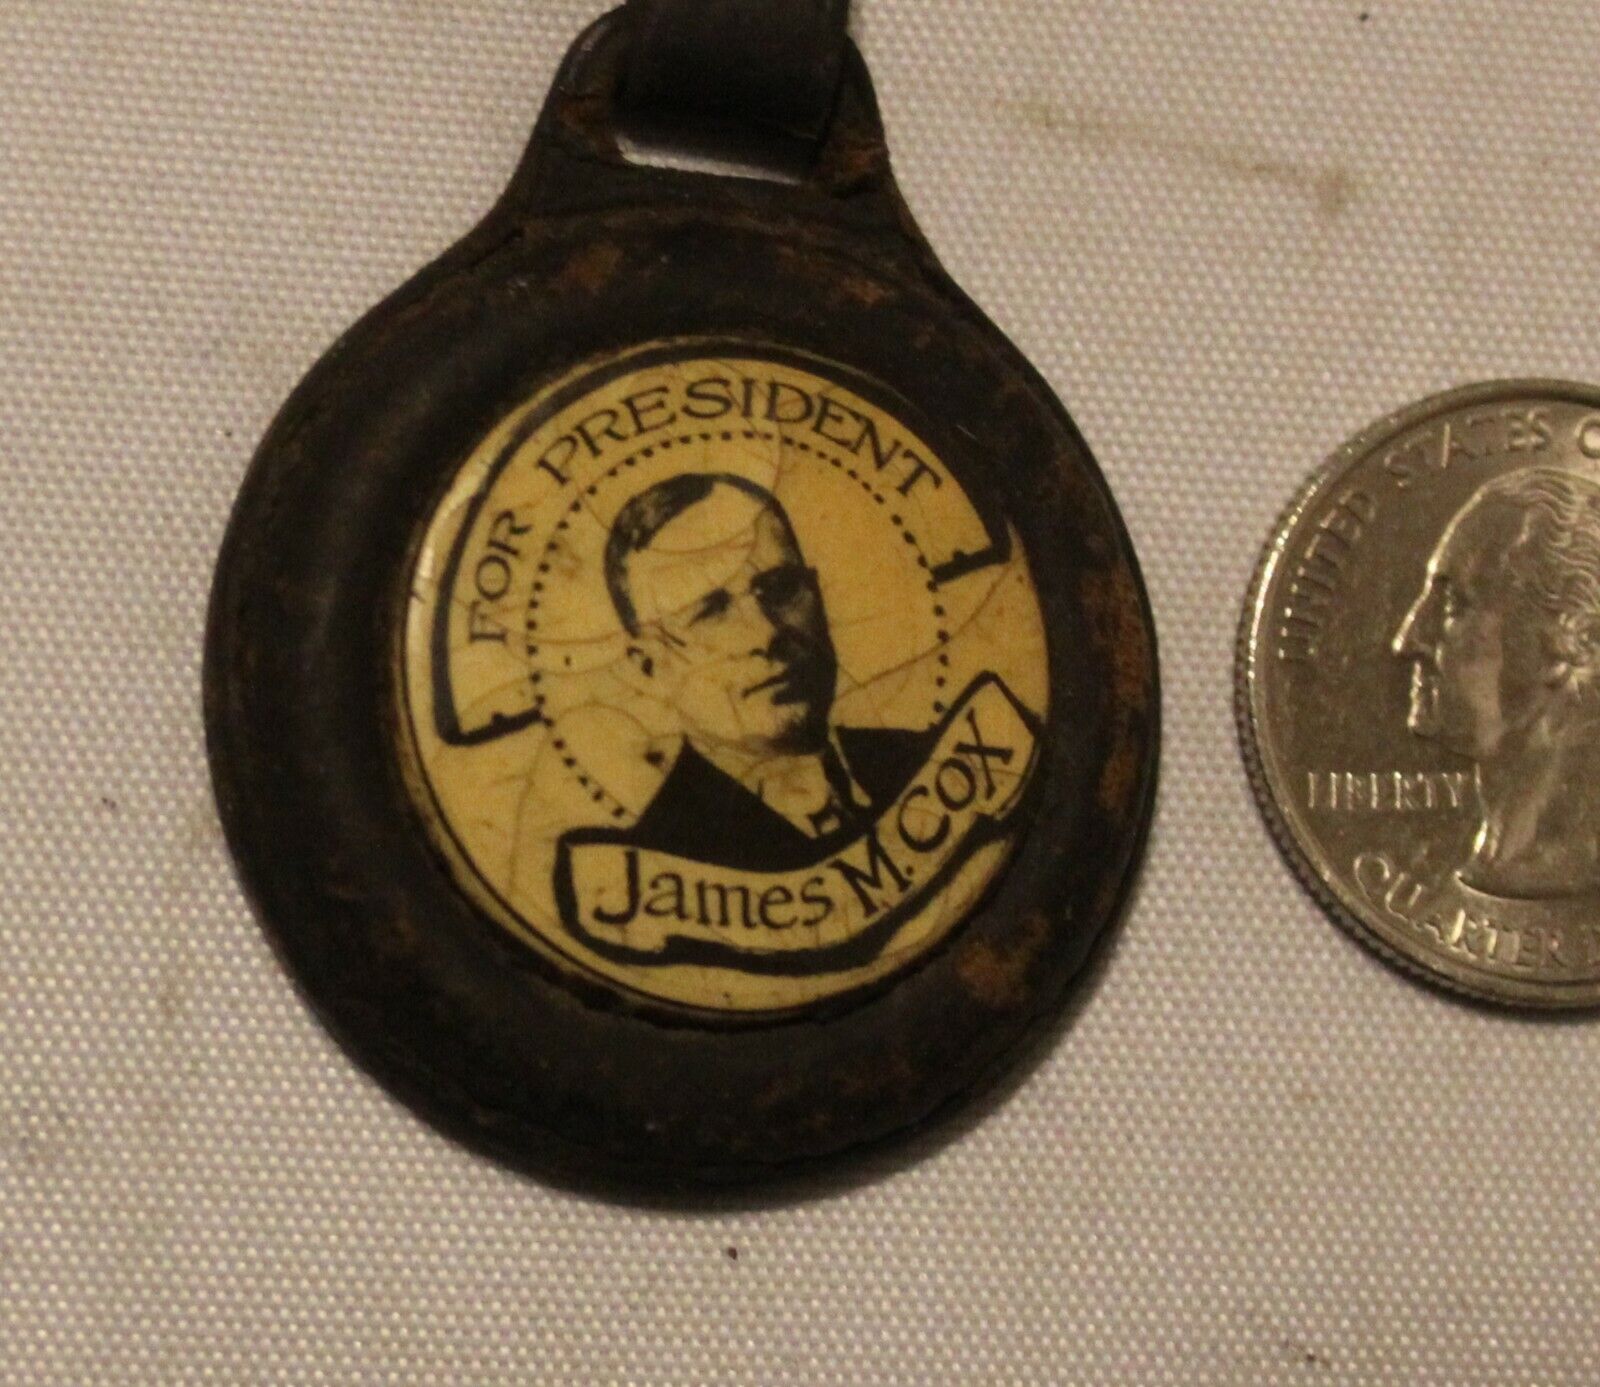 James M Cox for President Real Photo Watch Fob Button Leather Rare Antique